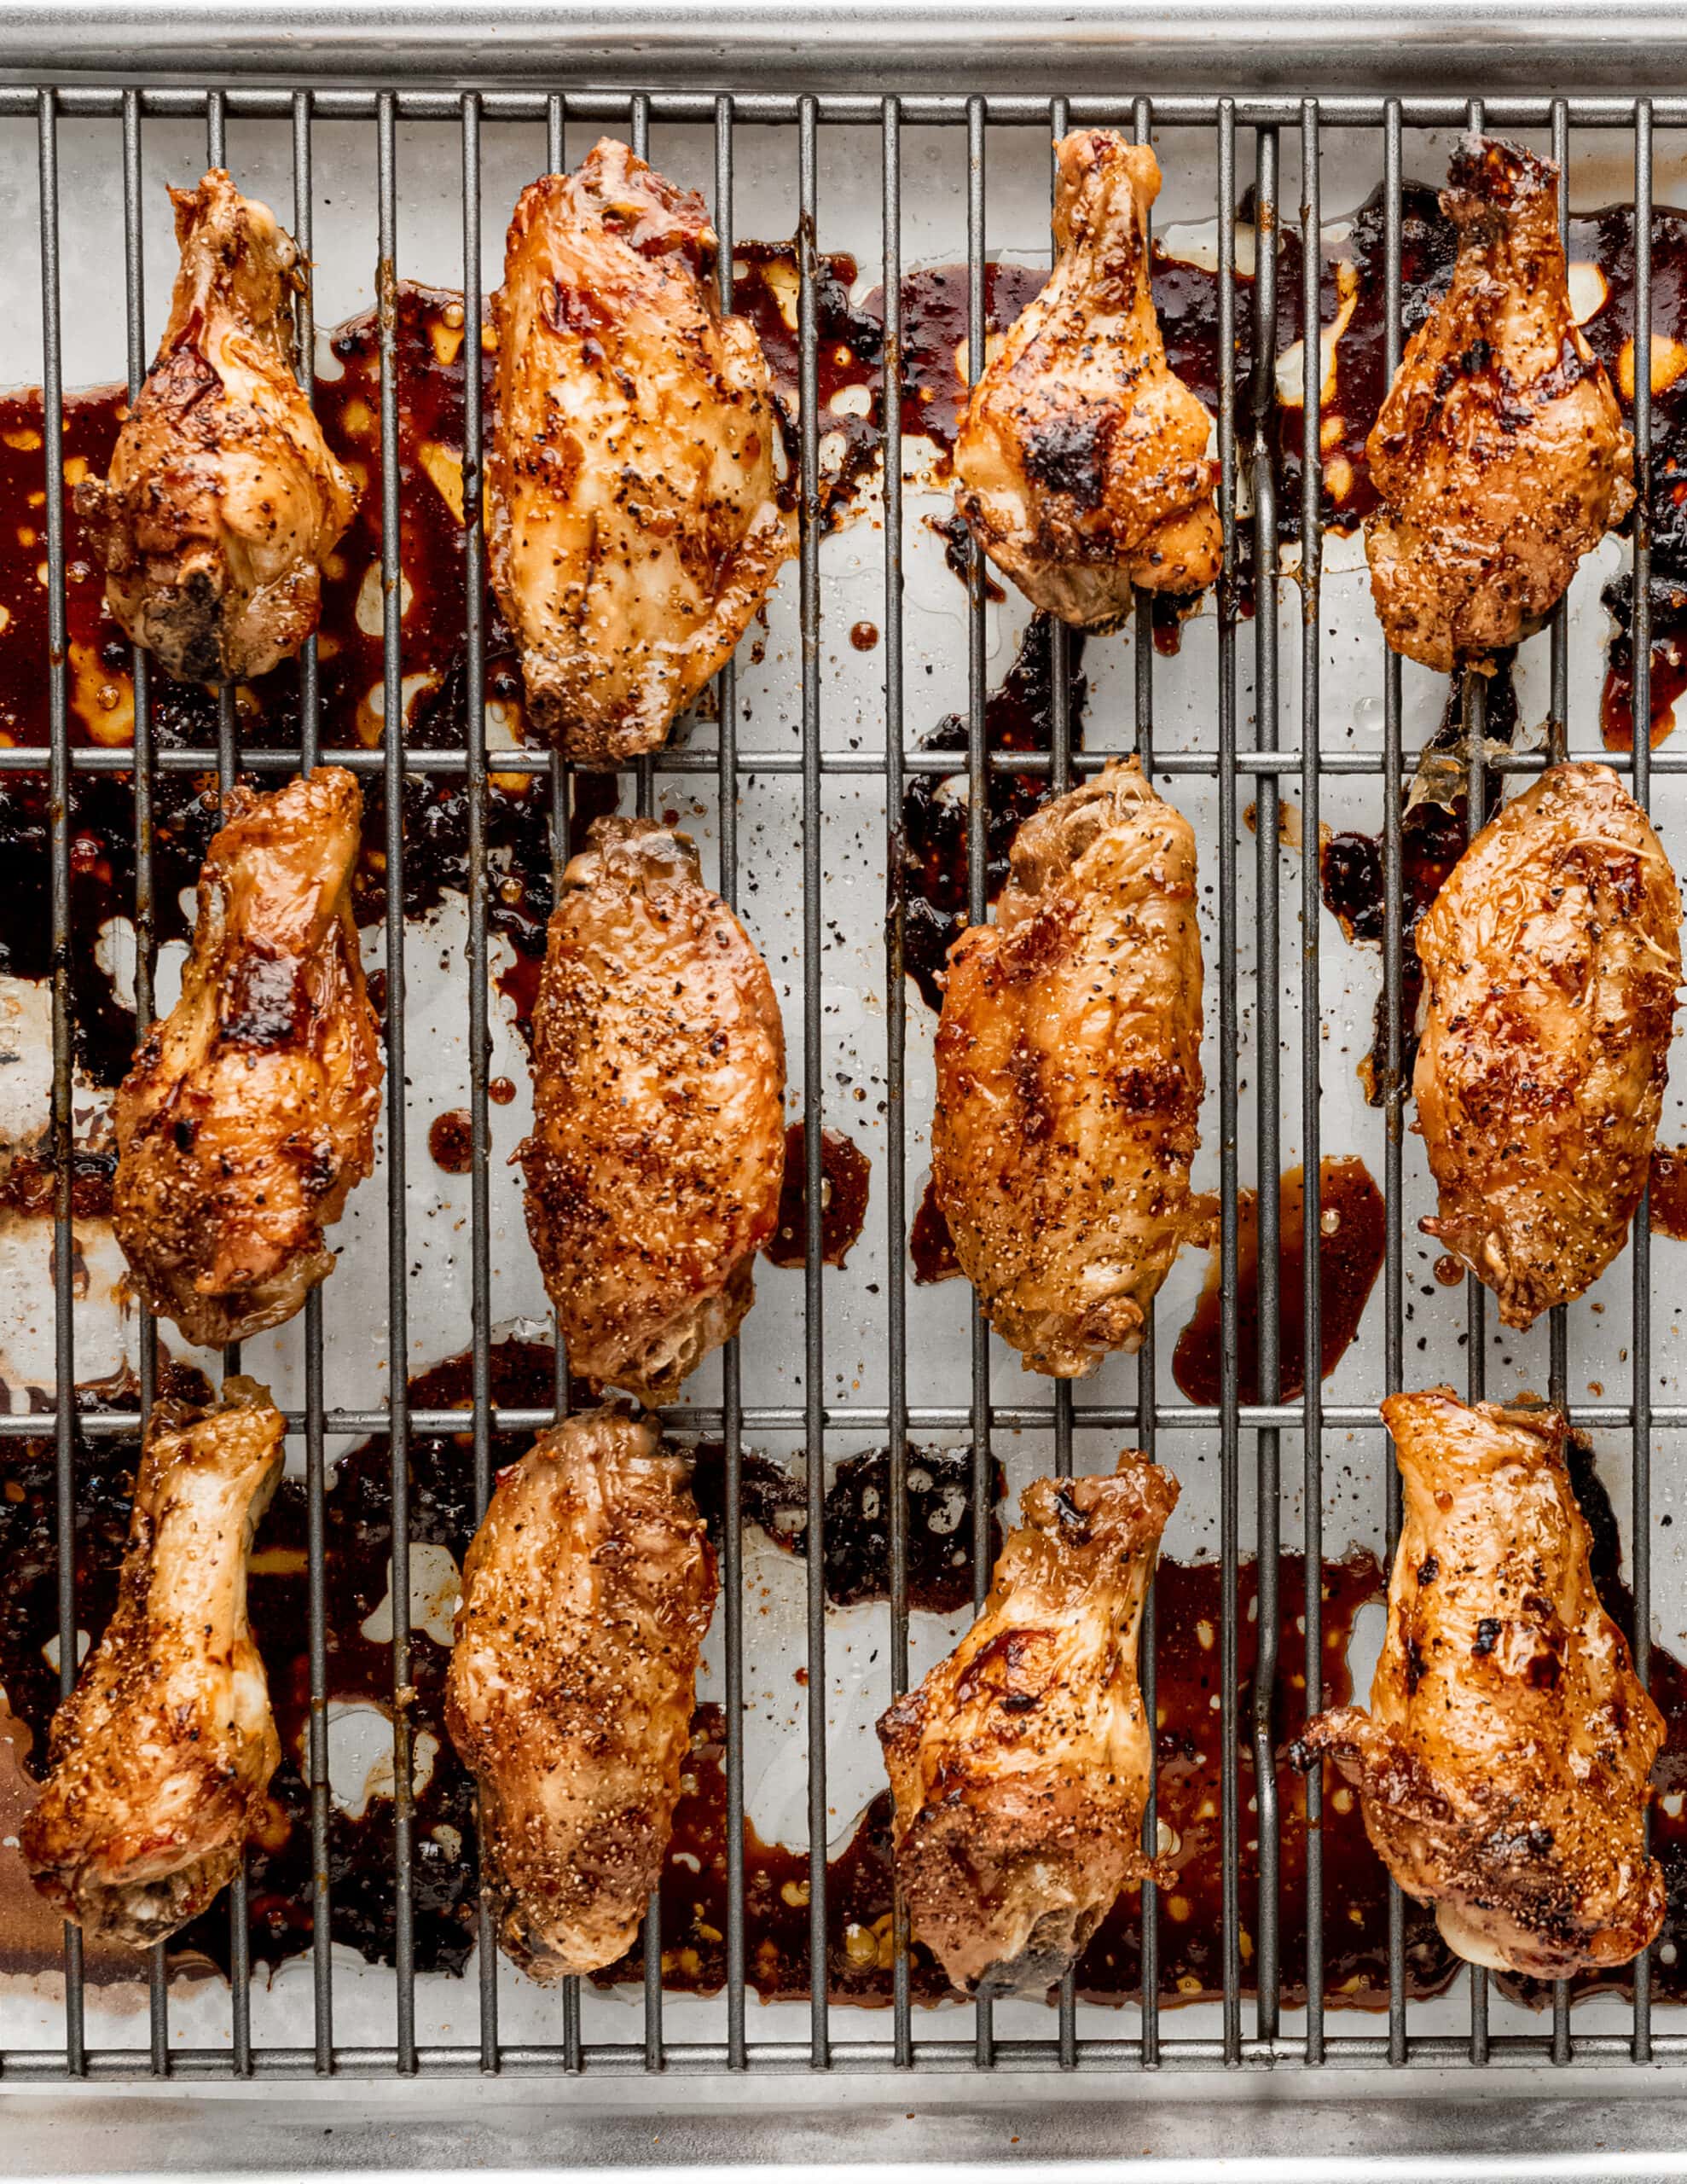 A metal baking rack with honey garlic ginger baked chicken wings glazed.